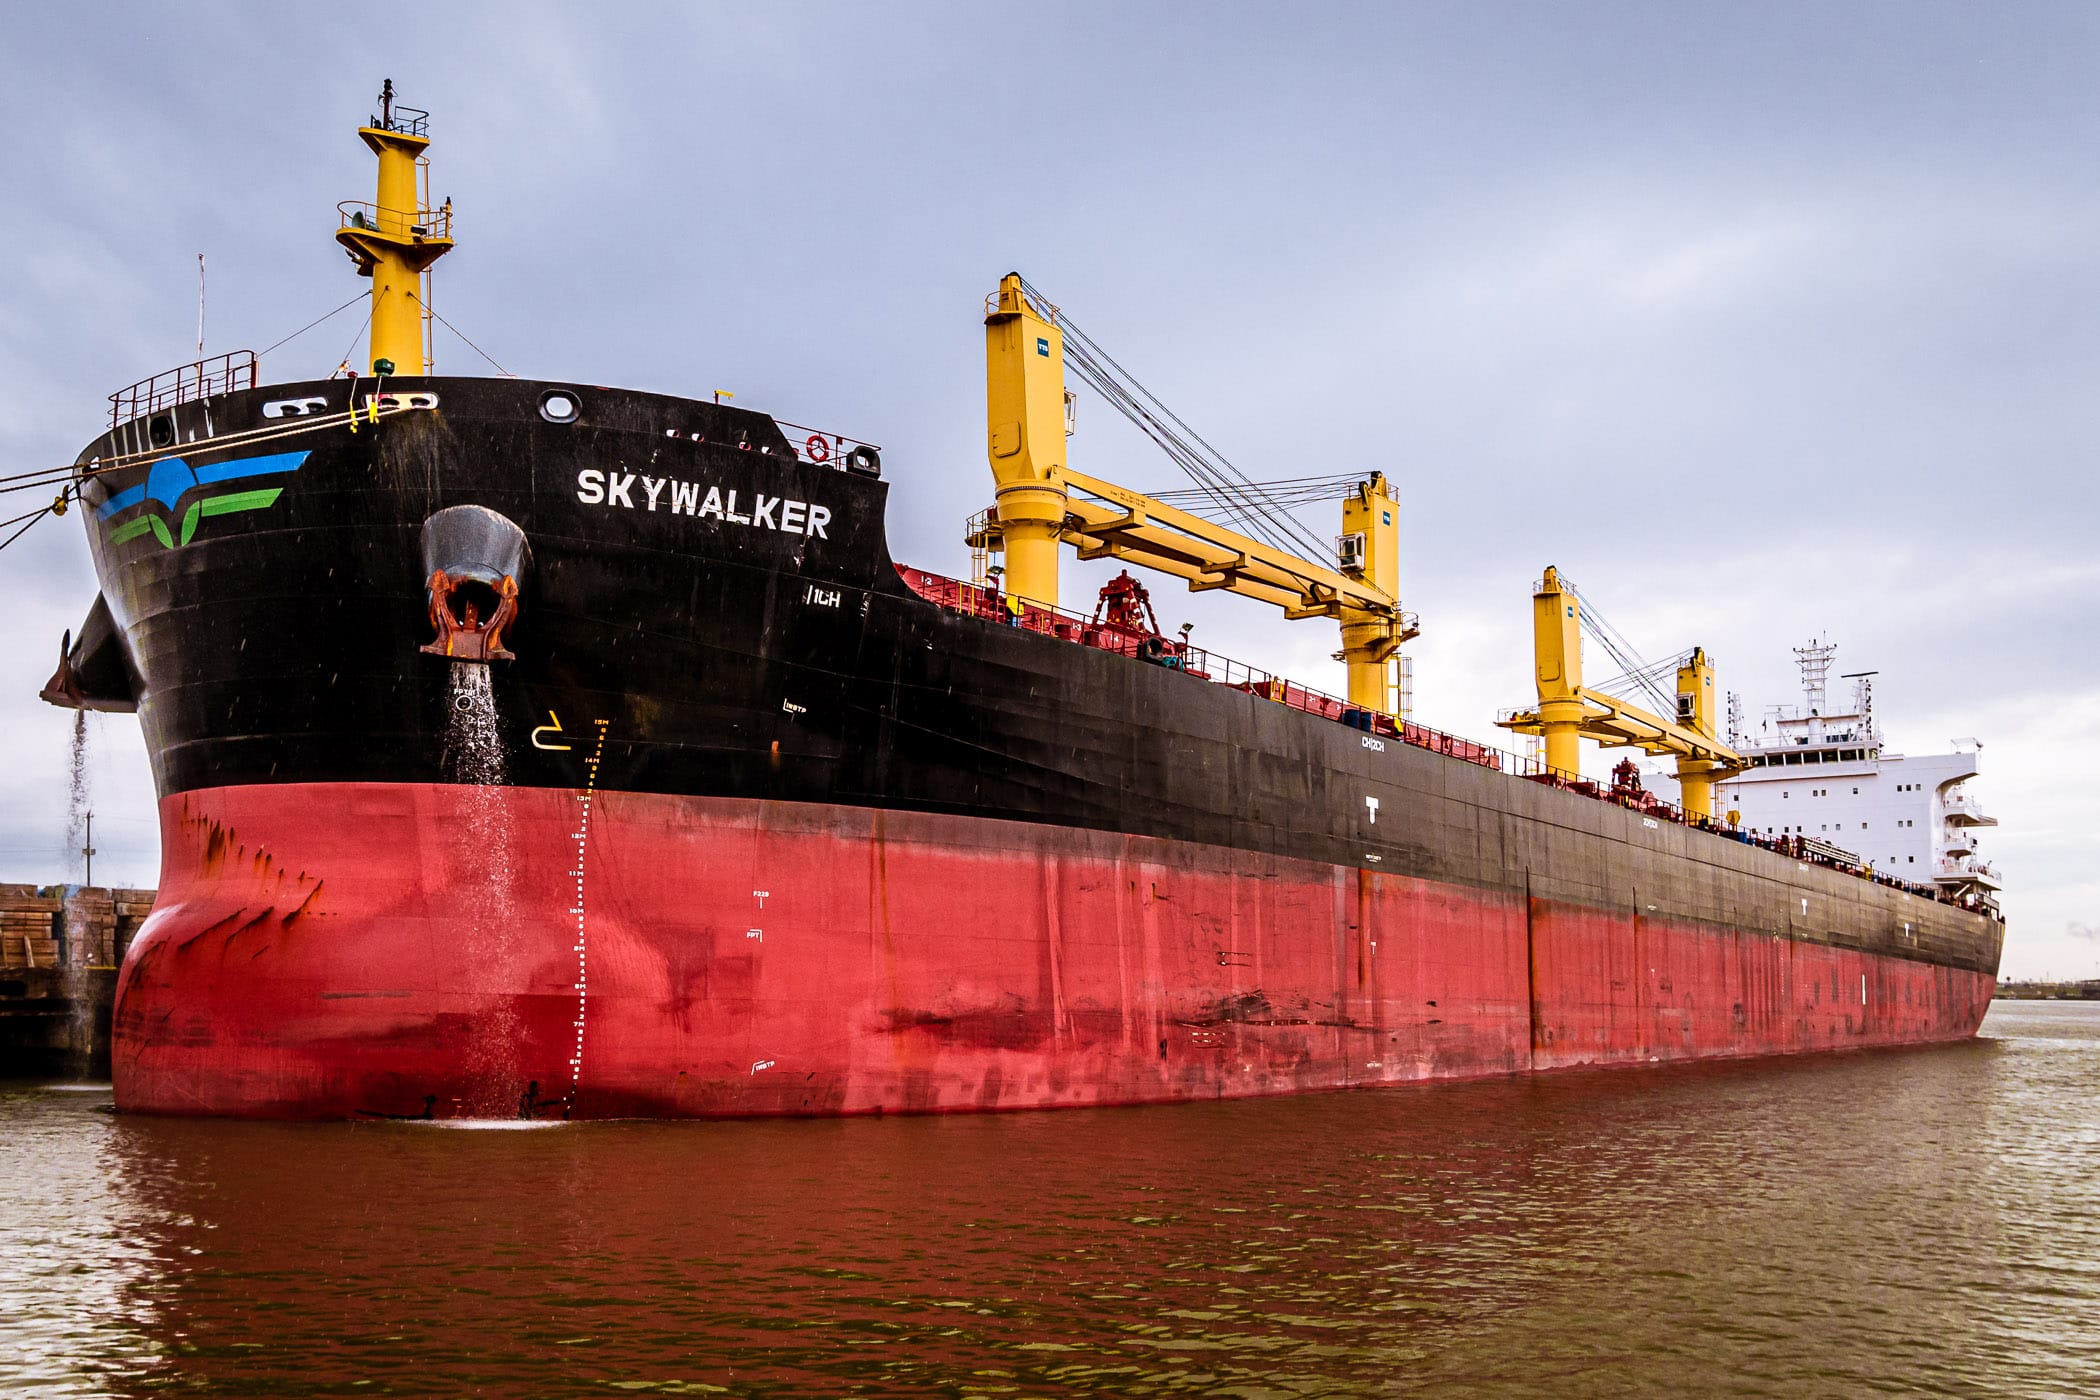 The bulk carrier Skywalker—undoubtedly named by a Star Wars fan—lies docked in the Port of Houston, Texas.